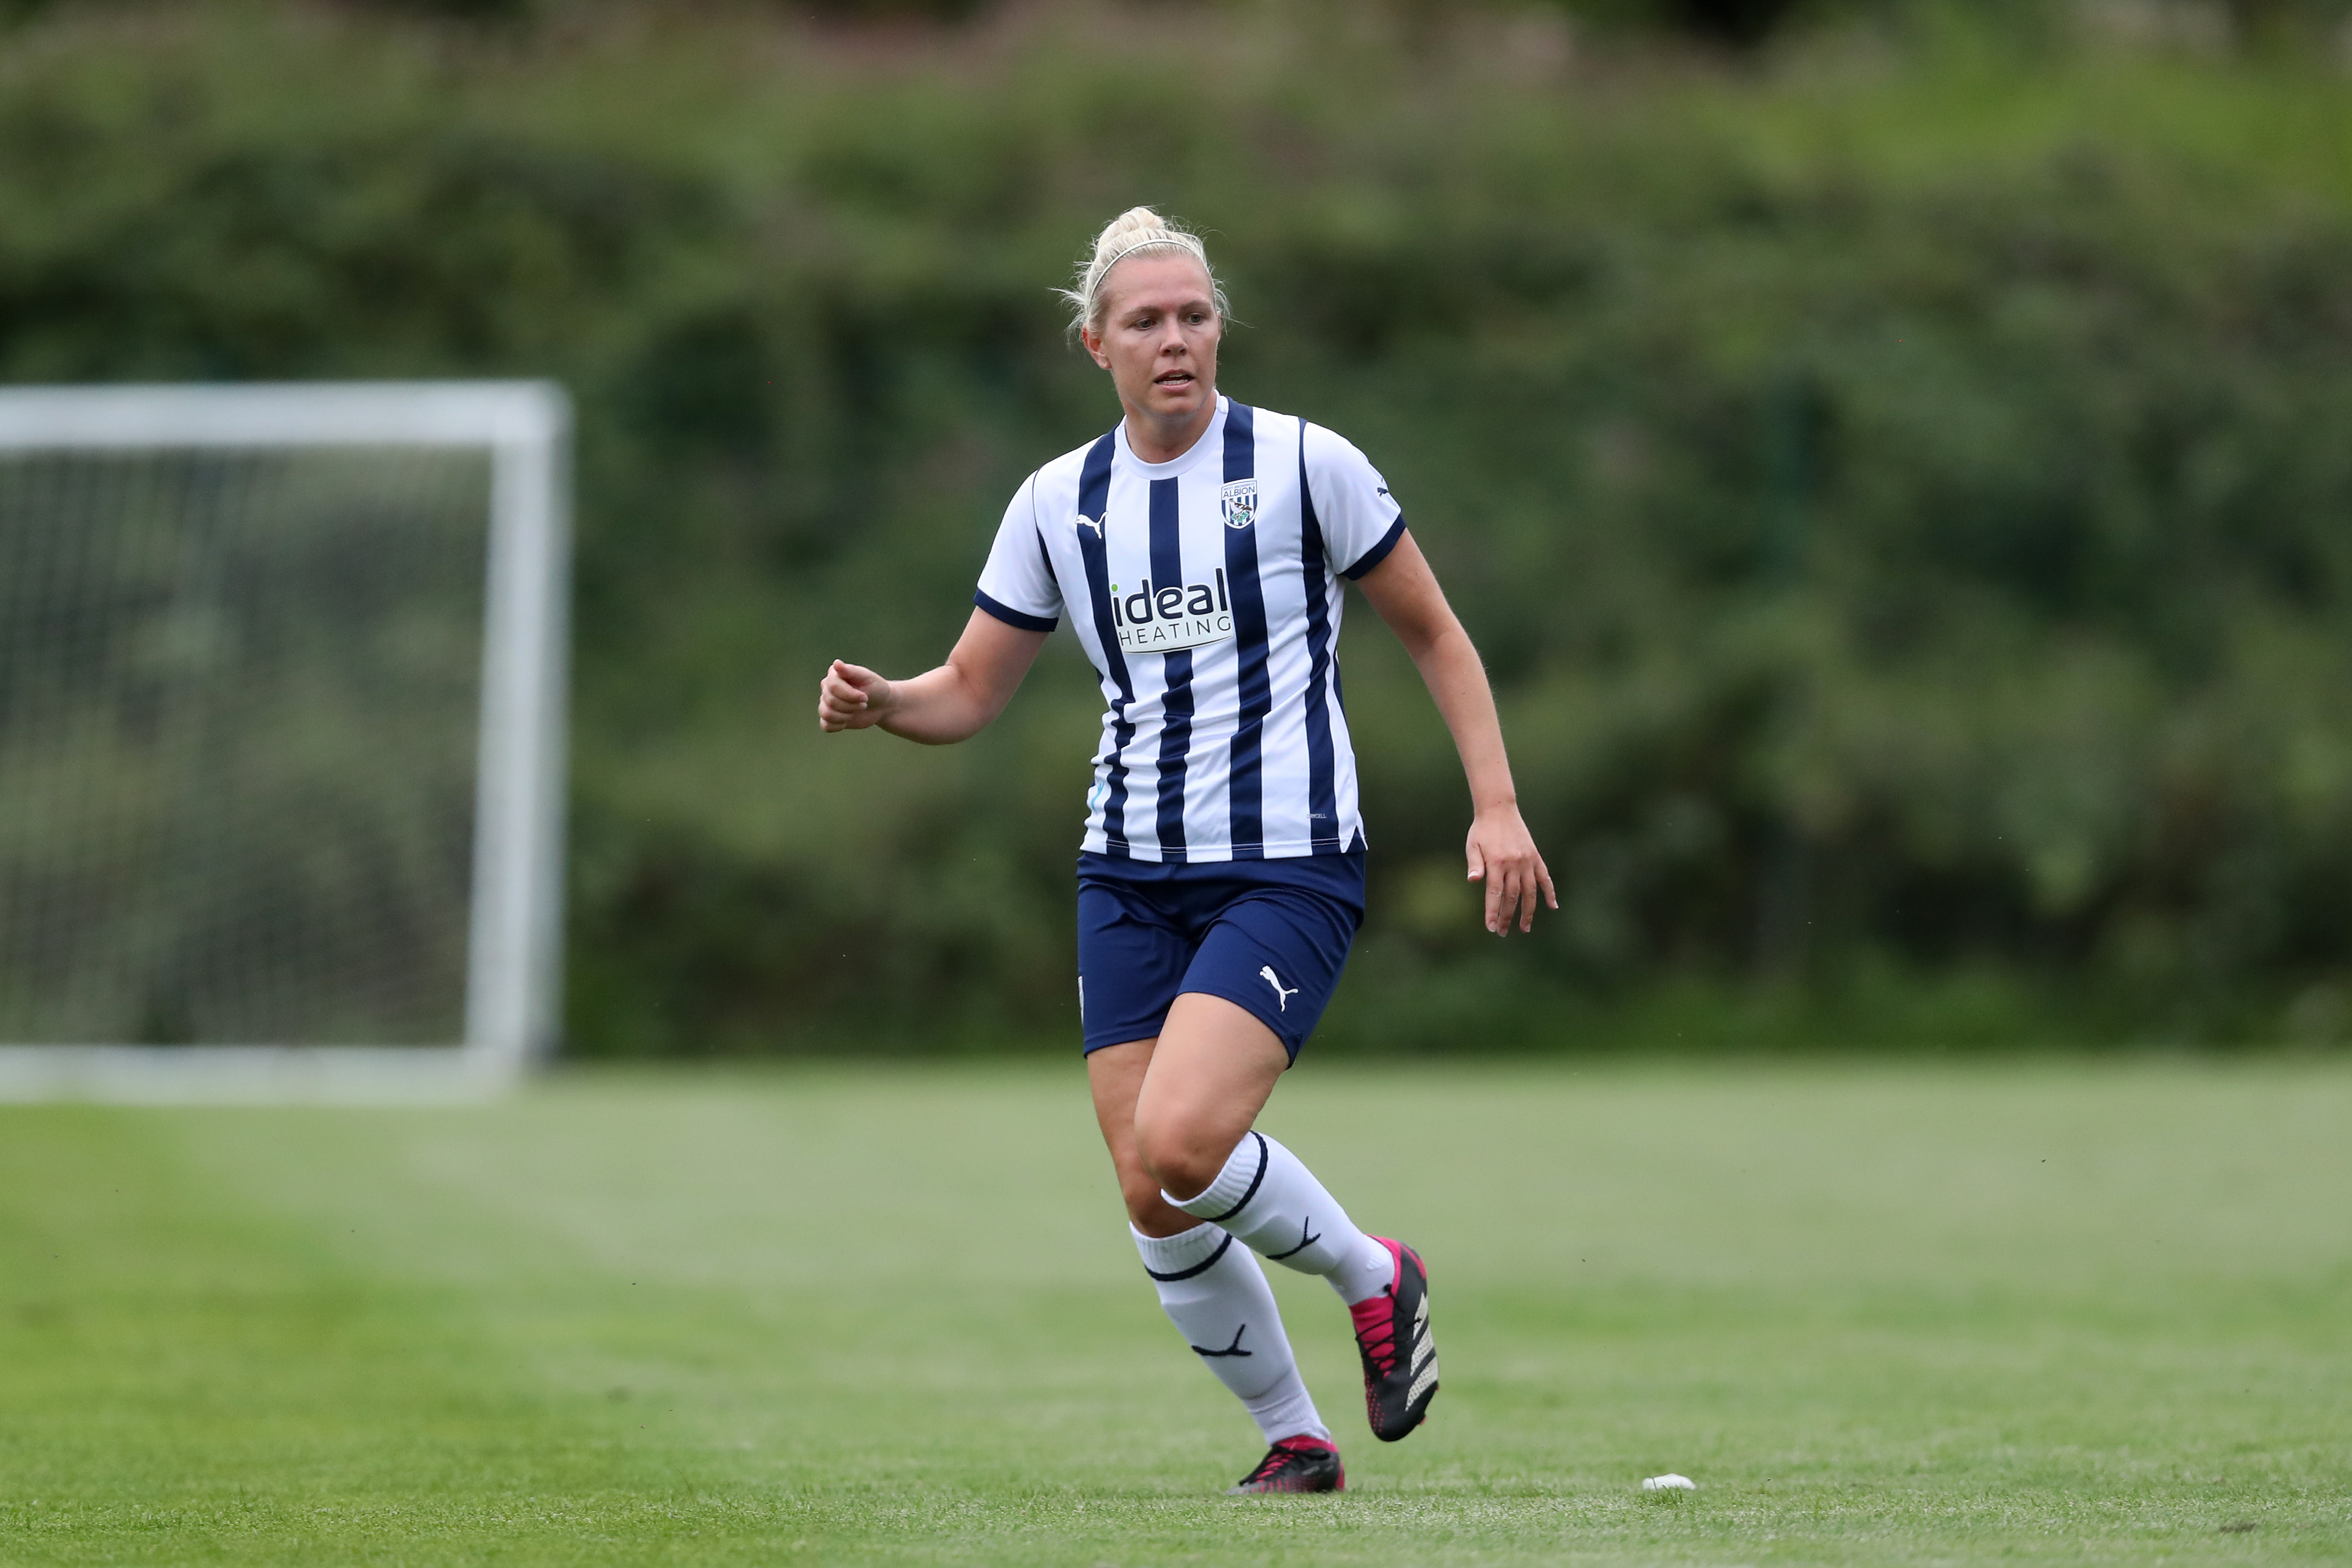 Hannah George in action for Albion Women while wearing the home kit